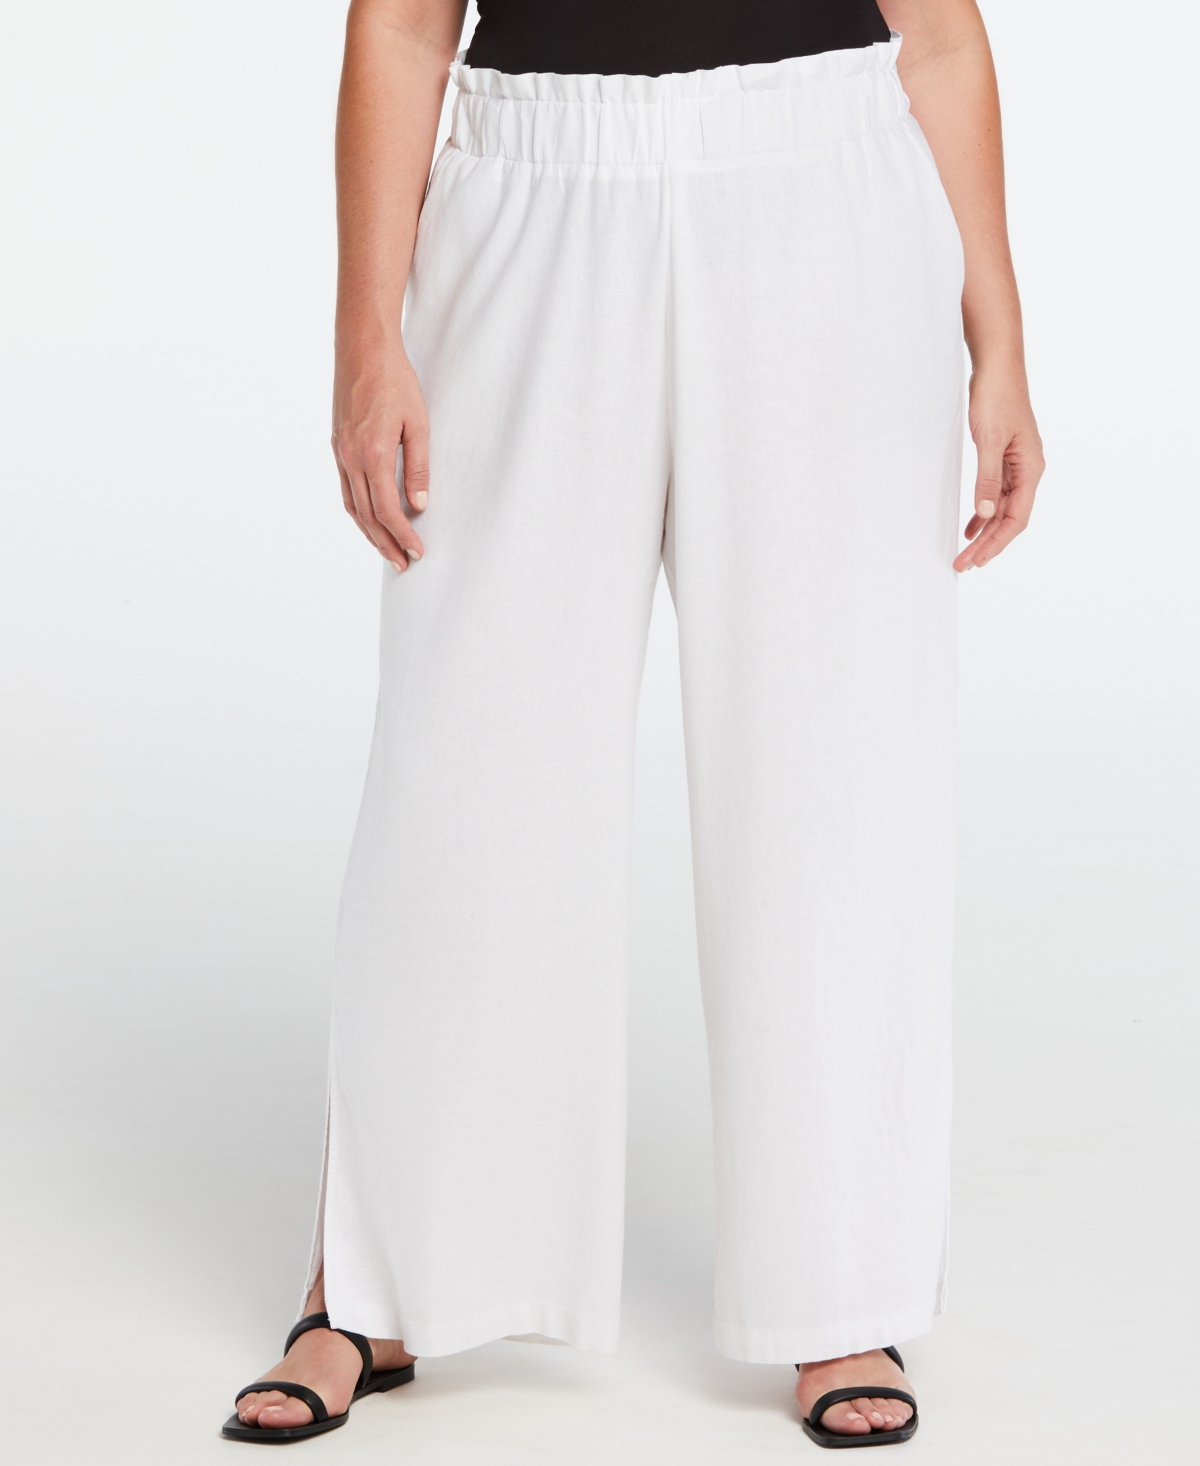 Plus Size Linen Blend Pull-On Wide Leg Pant with Side Slit - White